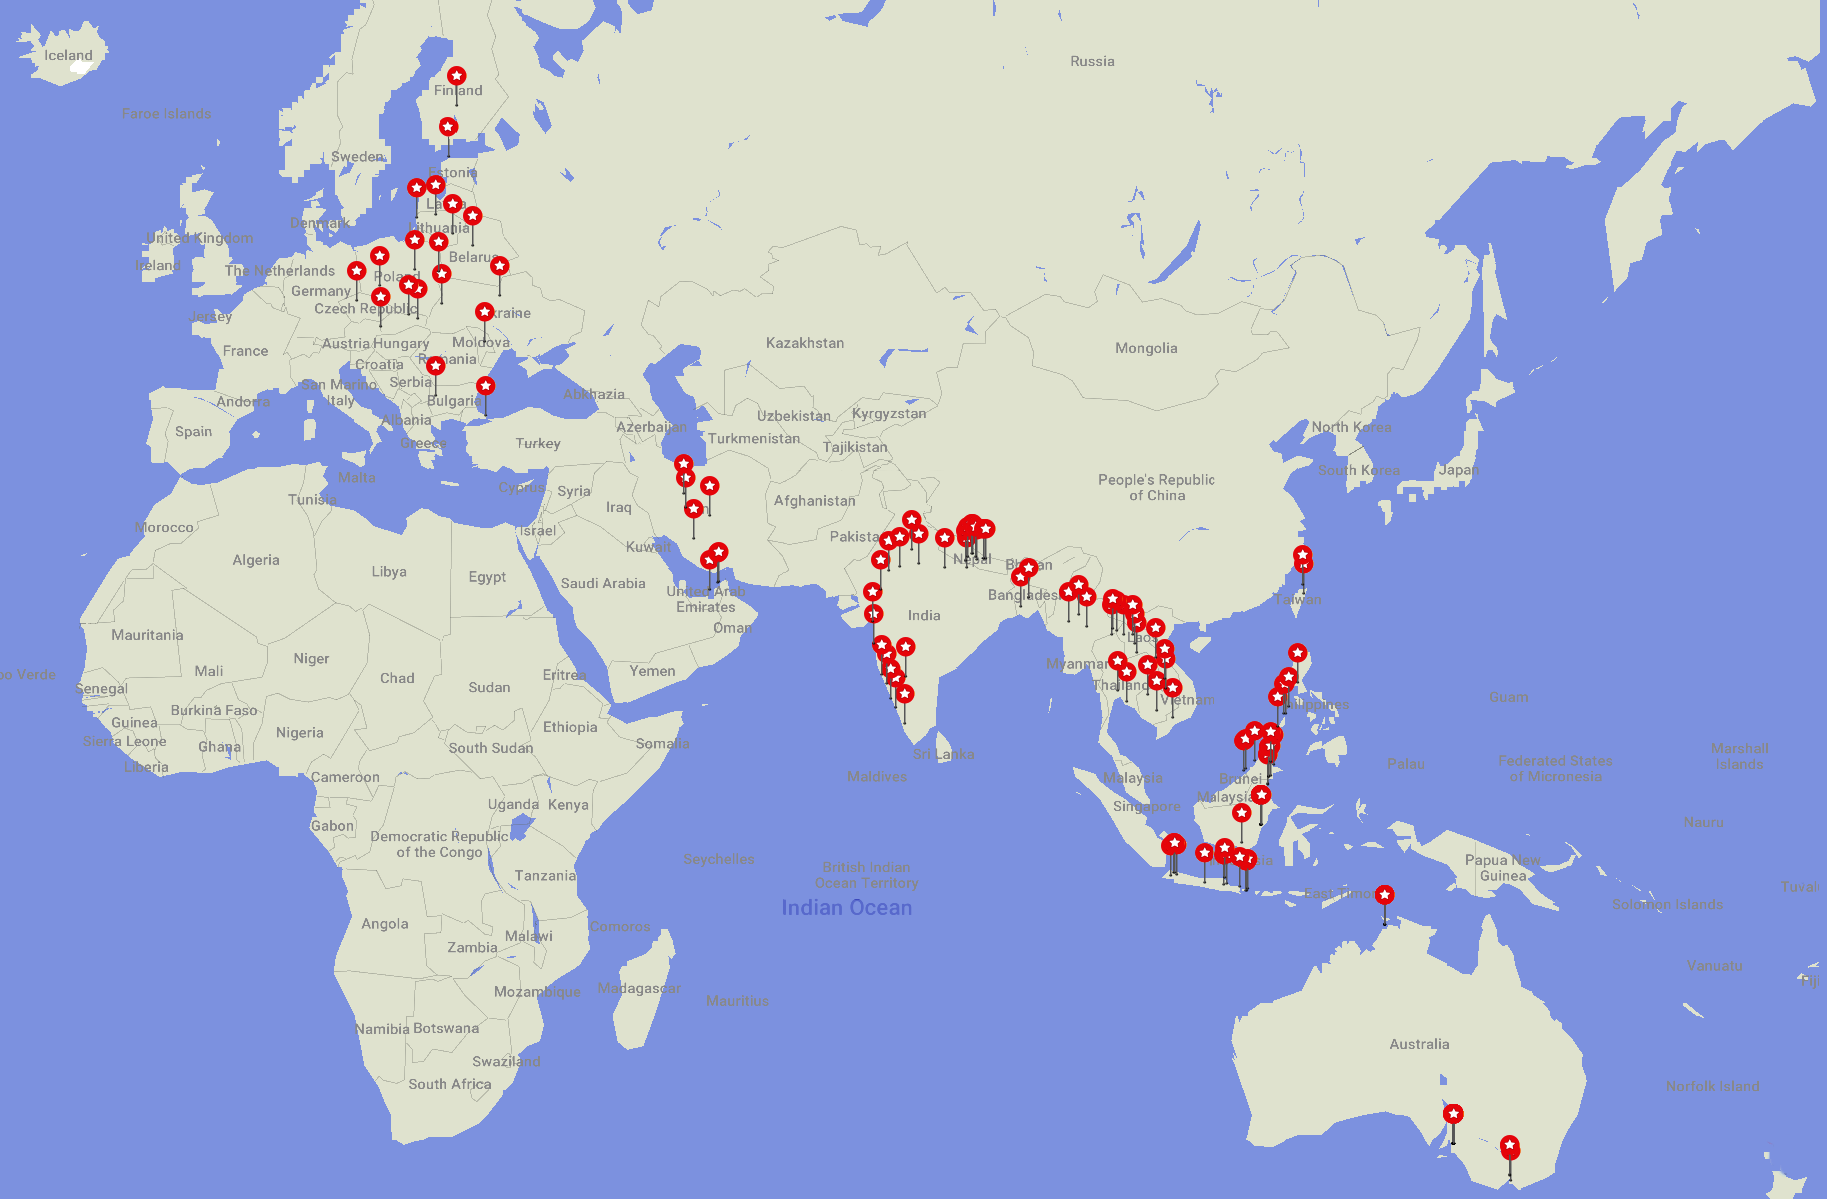 365 Days on the Road. My stops on the first year of a RTW trip.